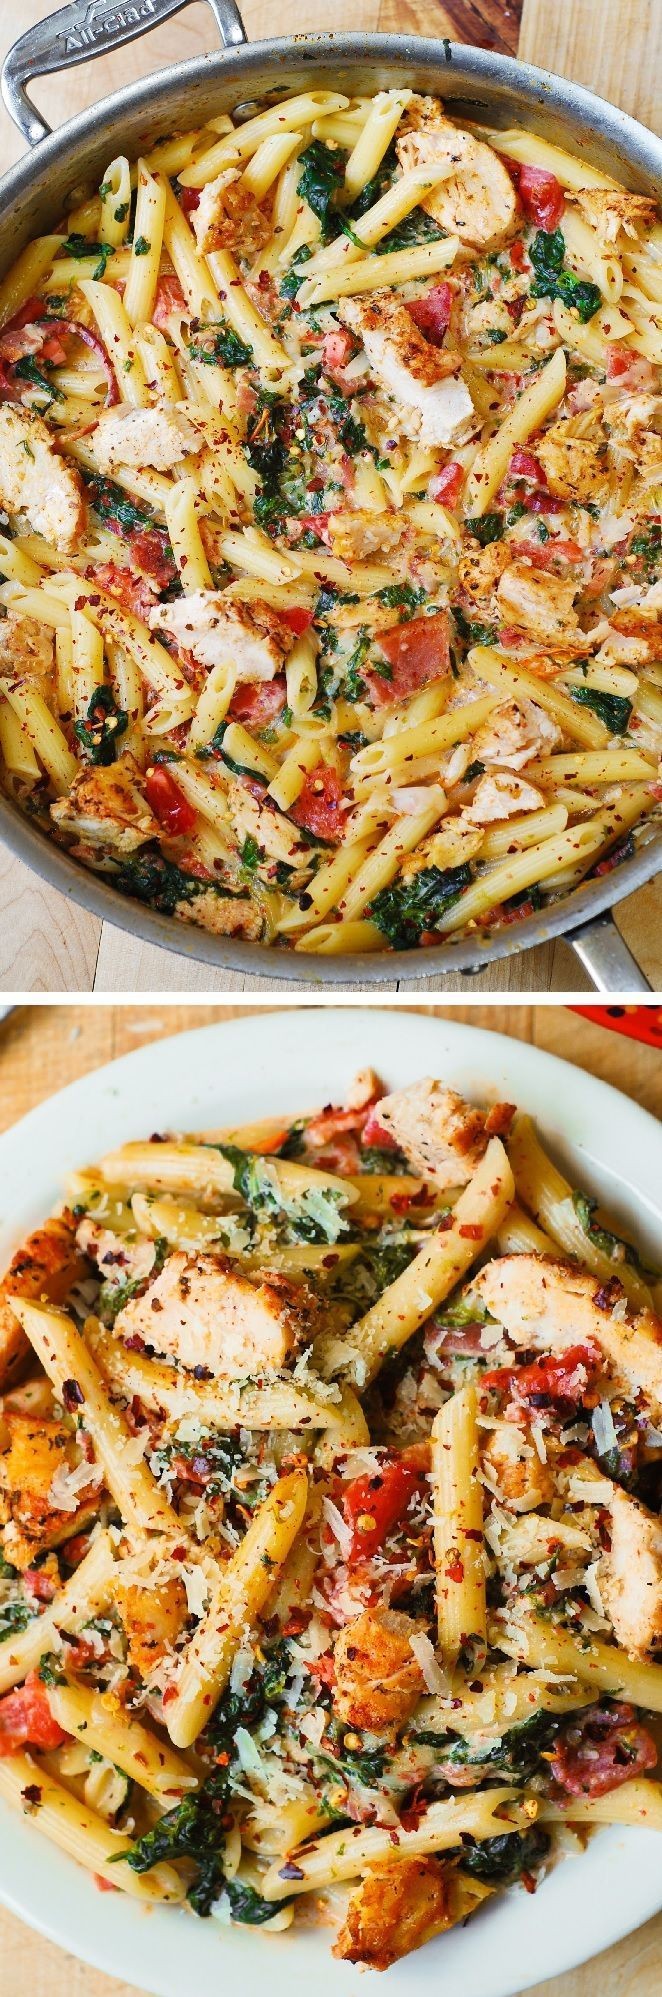 Chicken and Bacon Pasta with Spinach and Tomatoes...